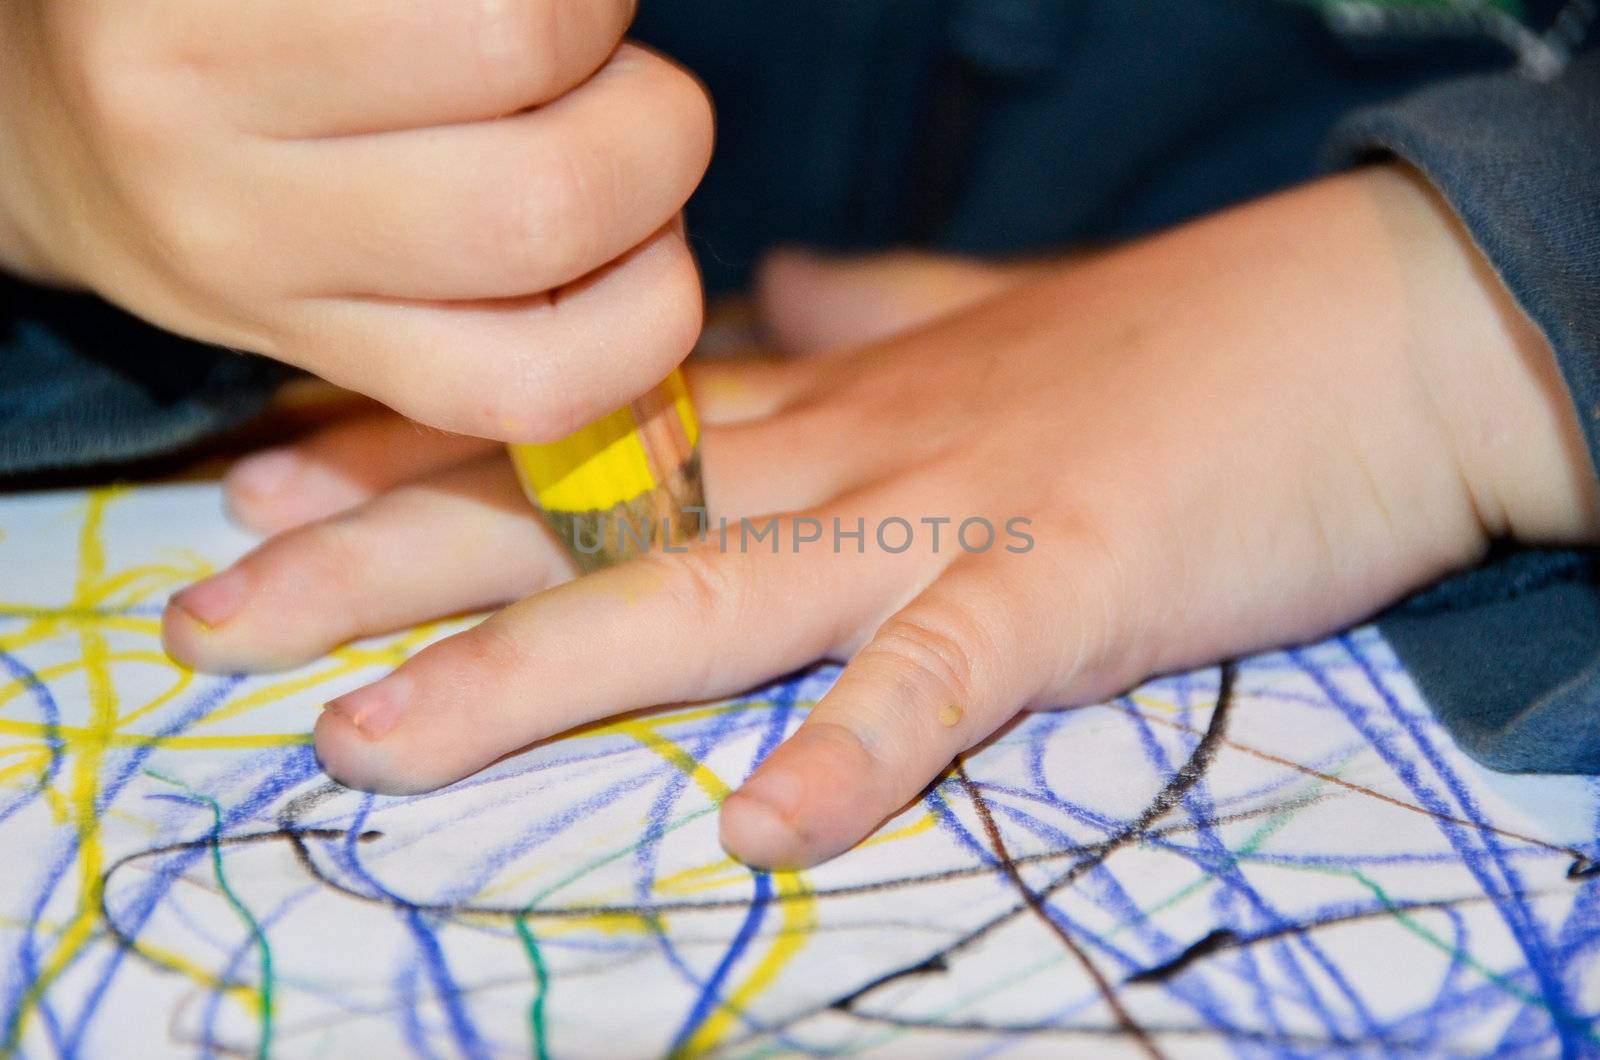 Closeup of a child drawing around its hand with a yellow pen on paper